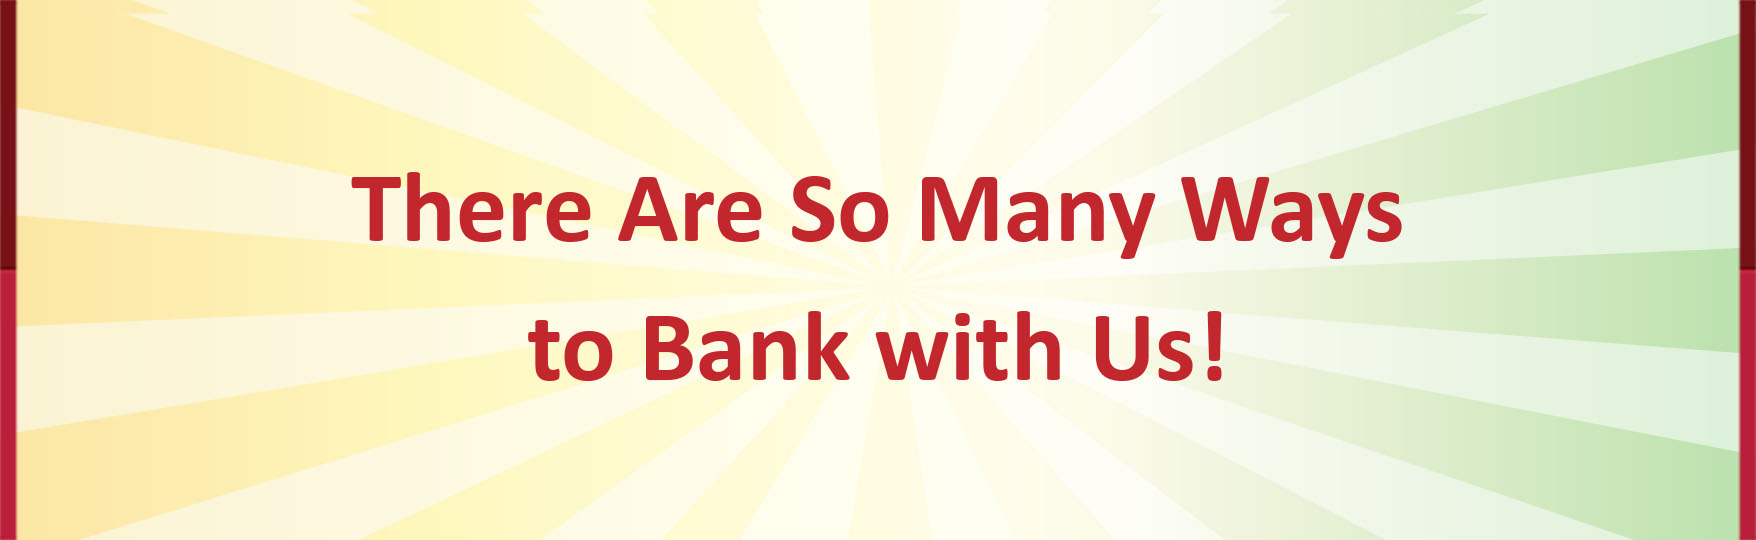 There are so many ways to bank with us!